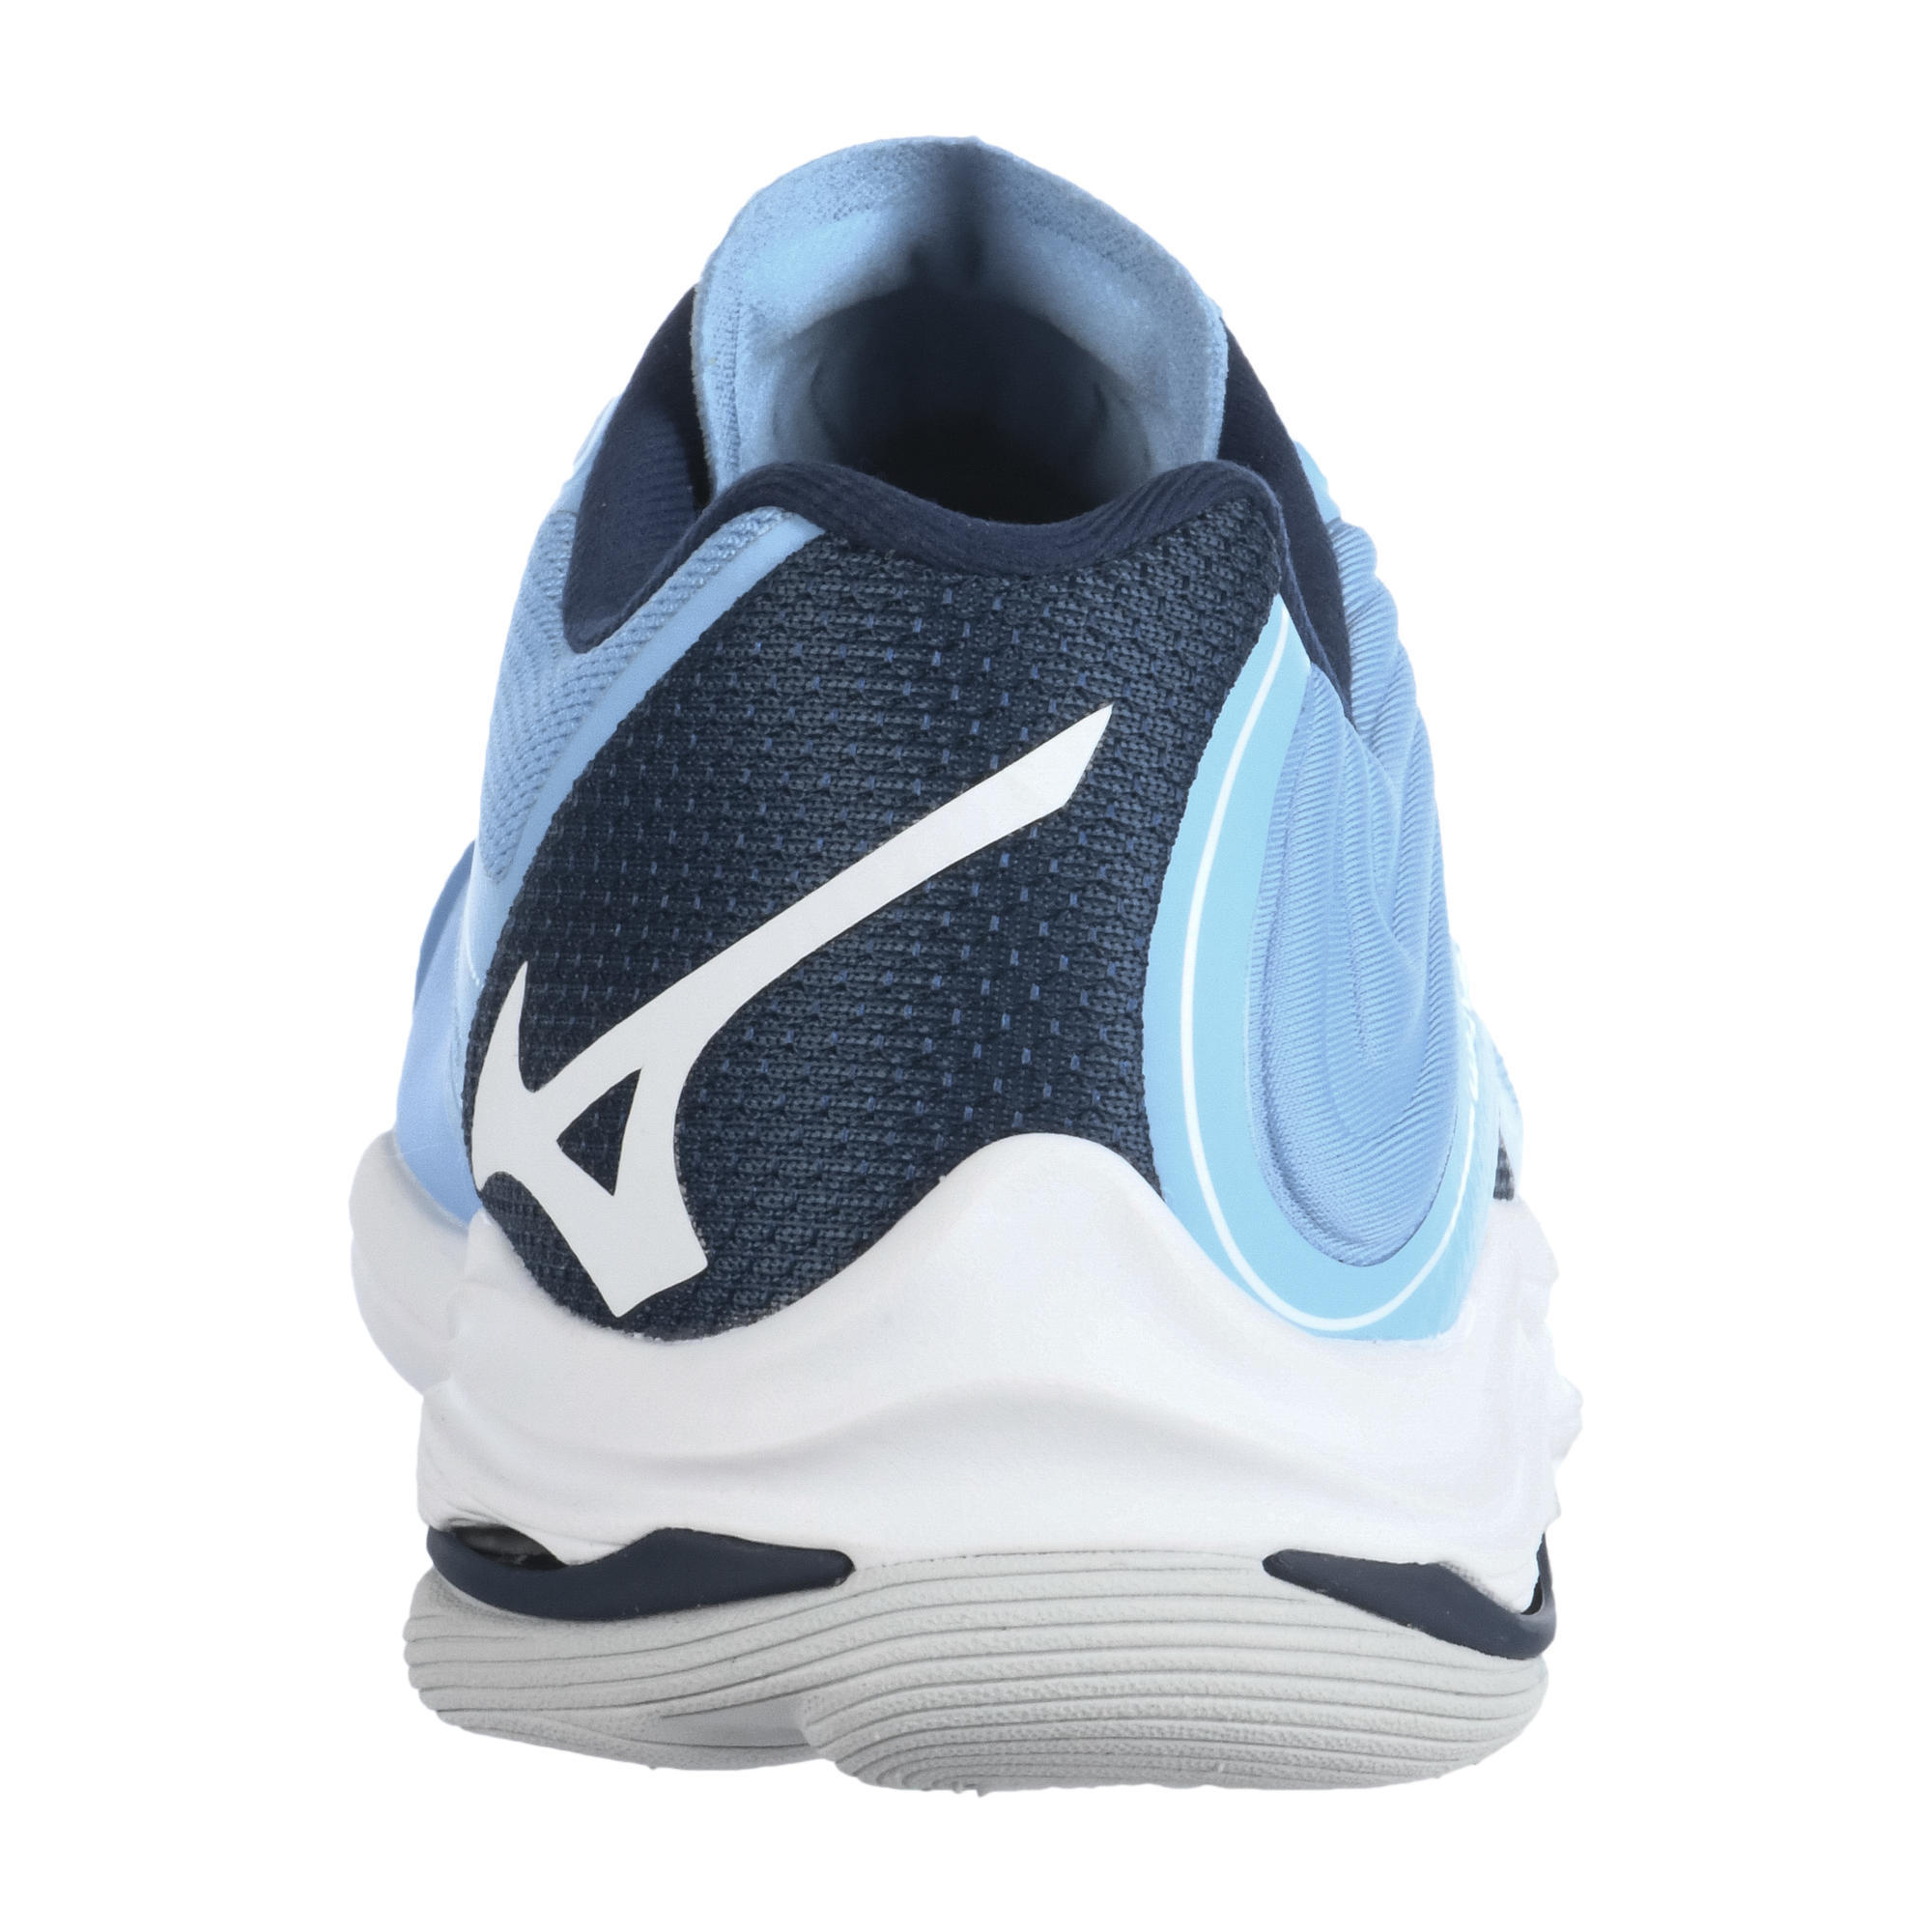 blue mizuno volleyball shoes